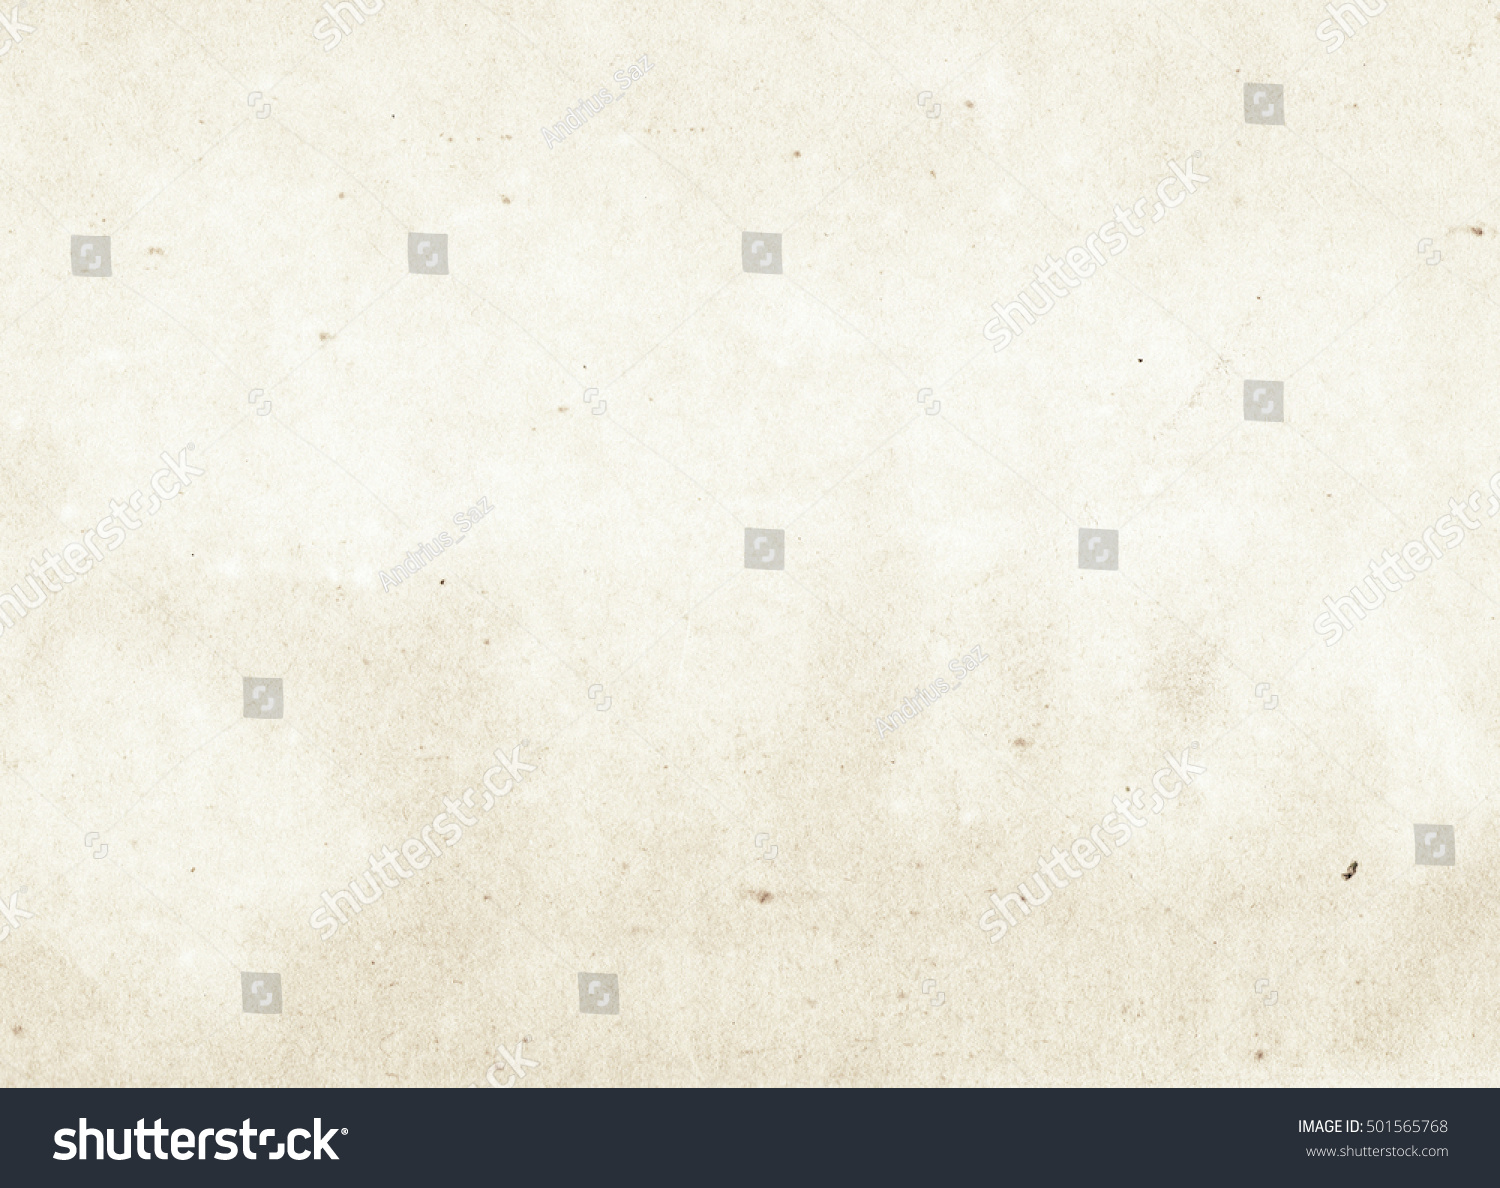 brown empty old vintage paper background. Paper texture #501565768